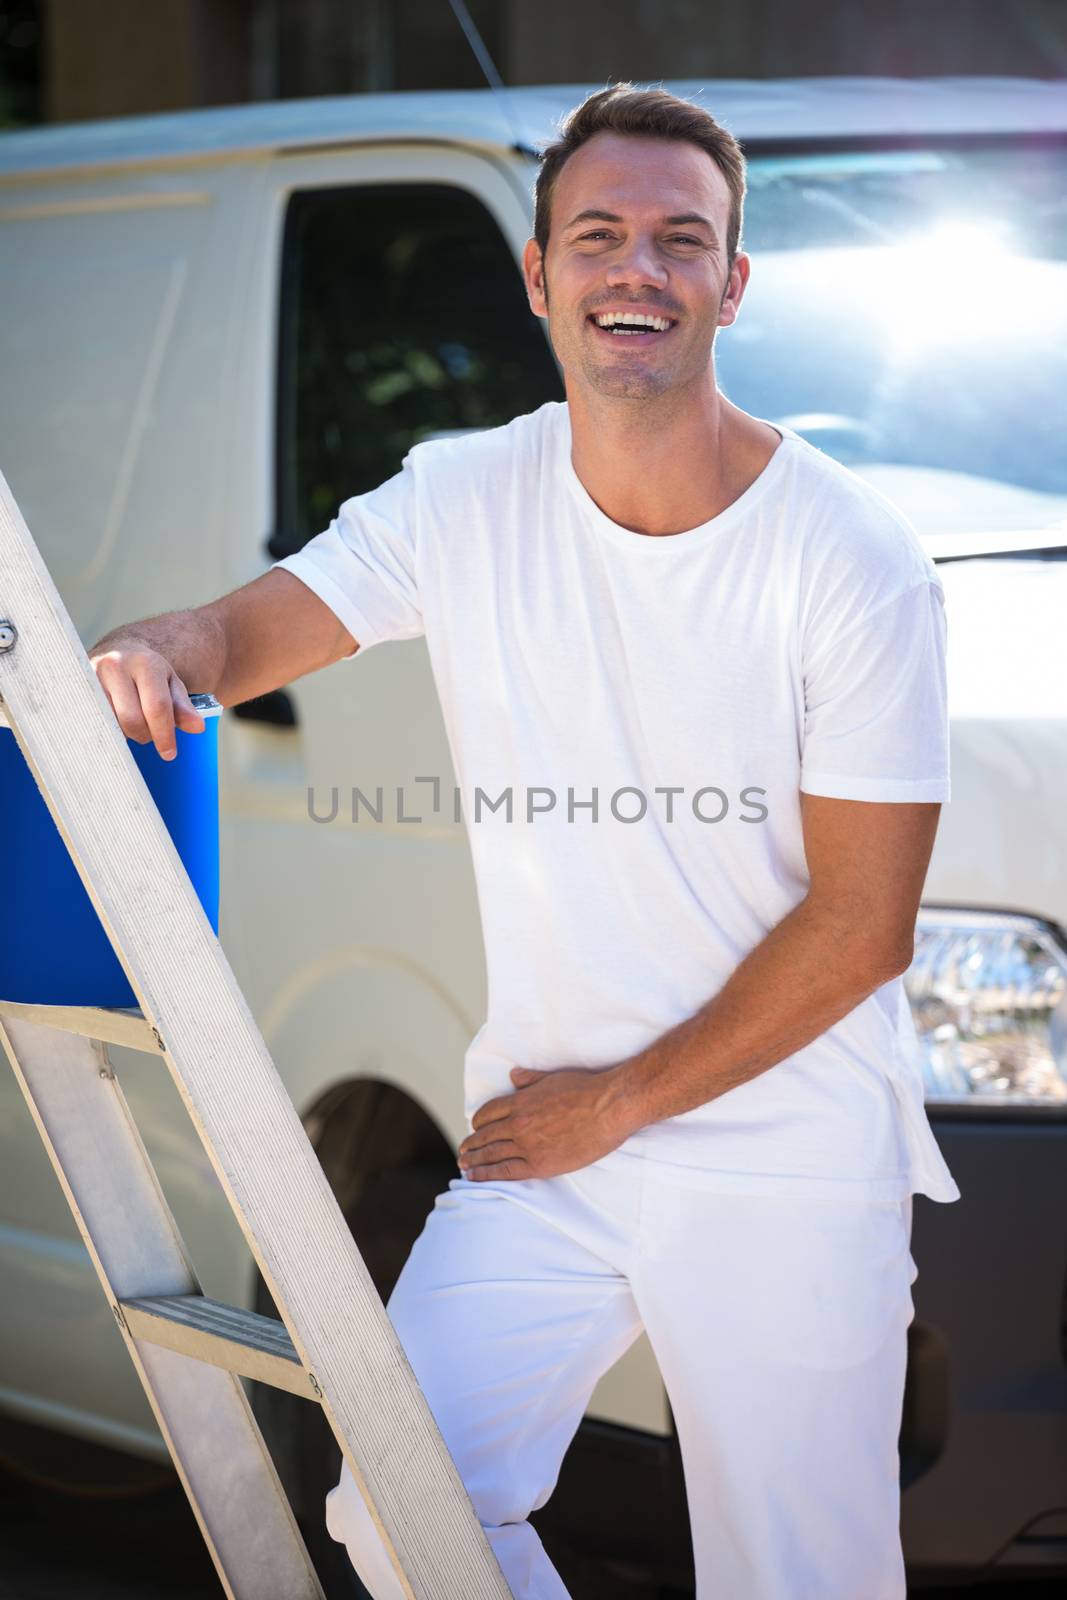 Portrait of painter with stepladder and bucket standing near his van